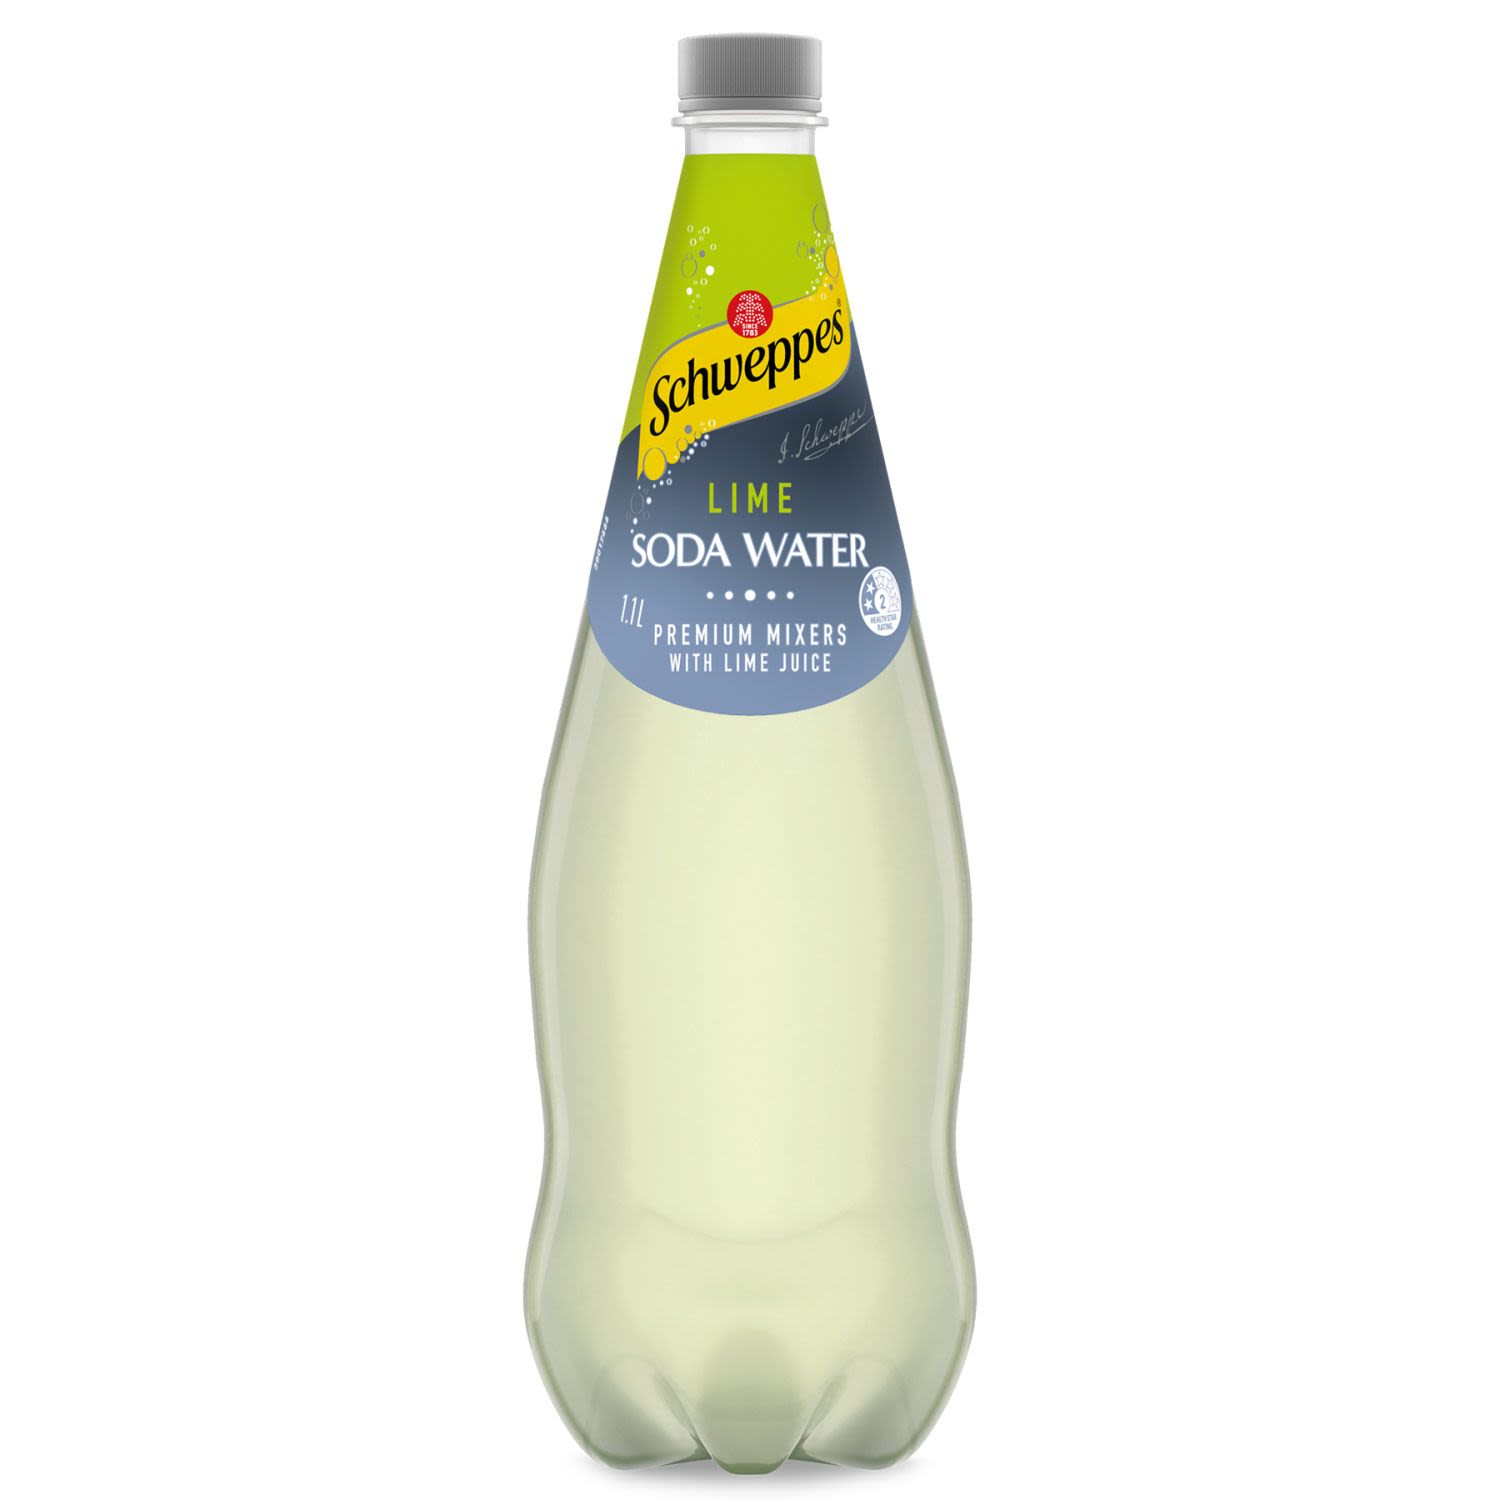 Schweppes Lime Soda Mixer with Lime Juice, 1.1 Litre